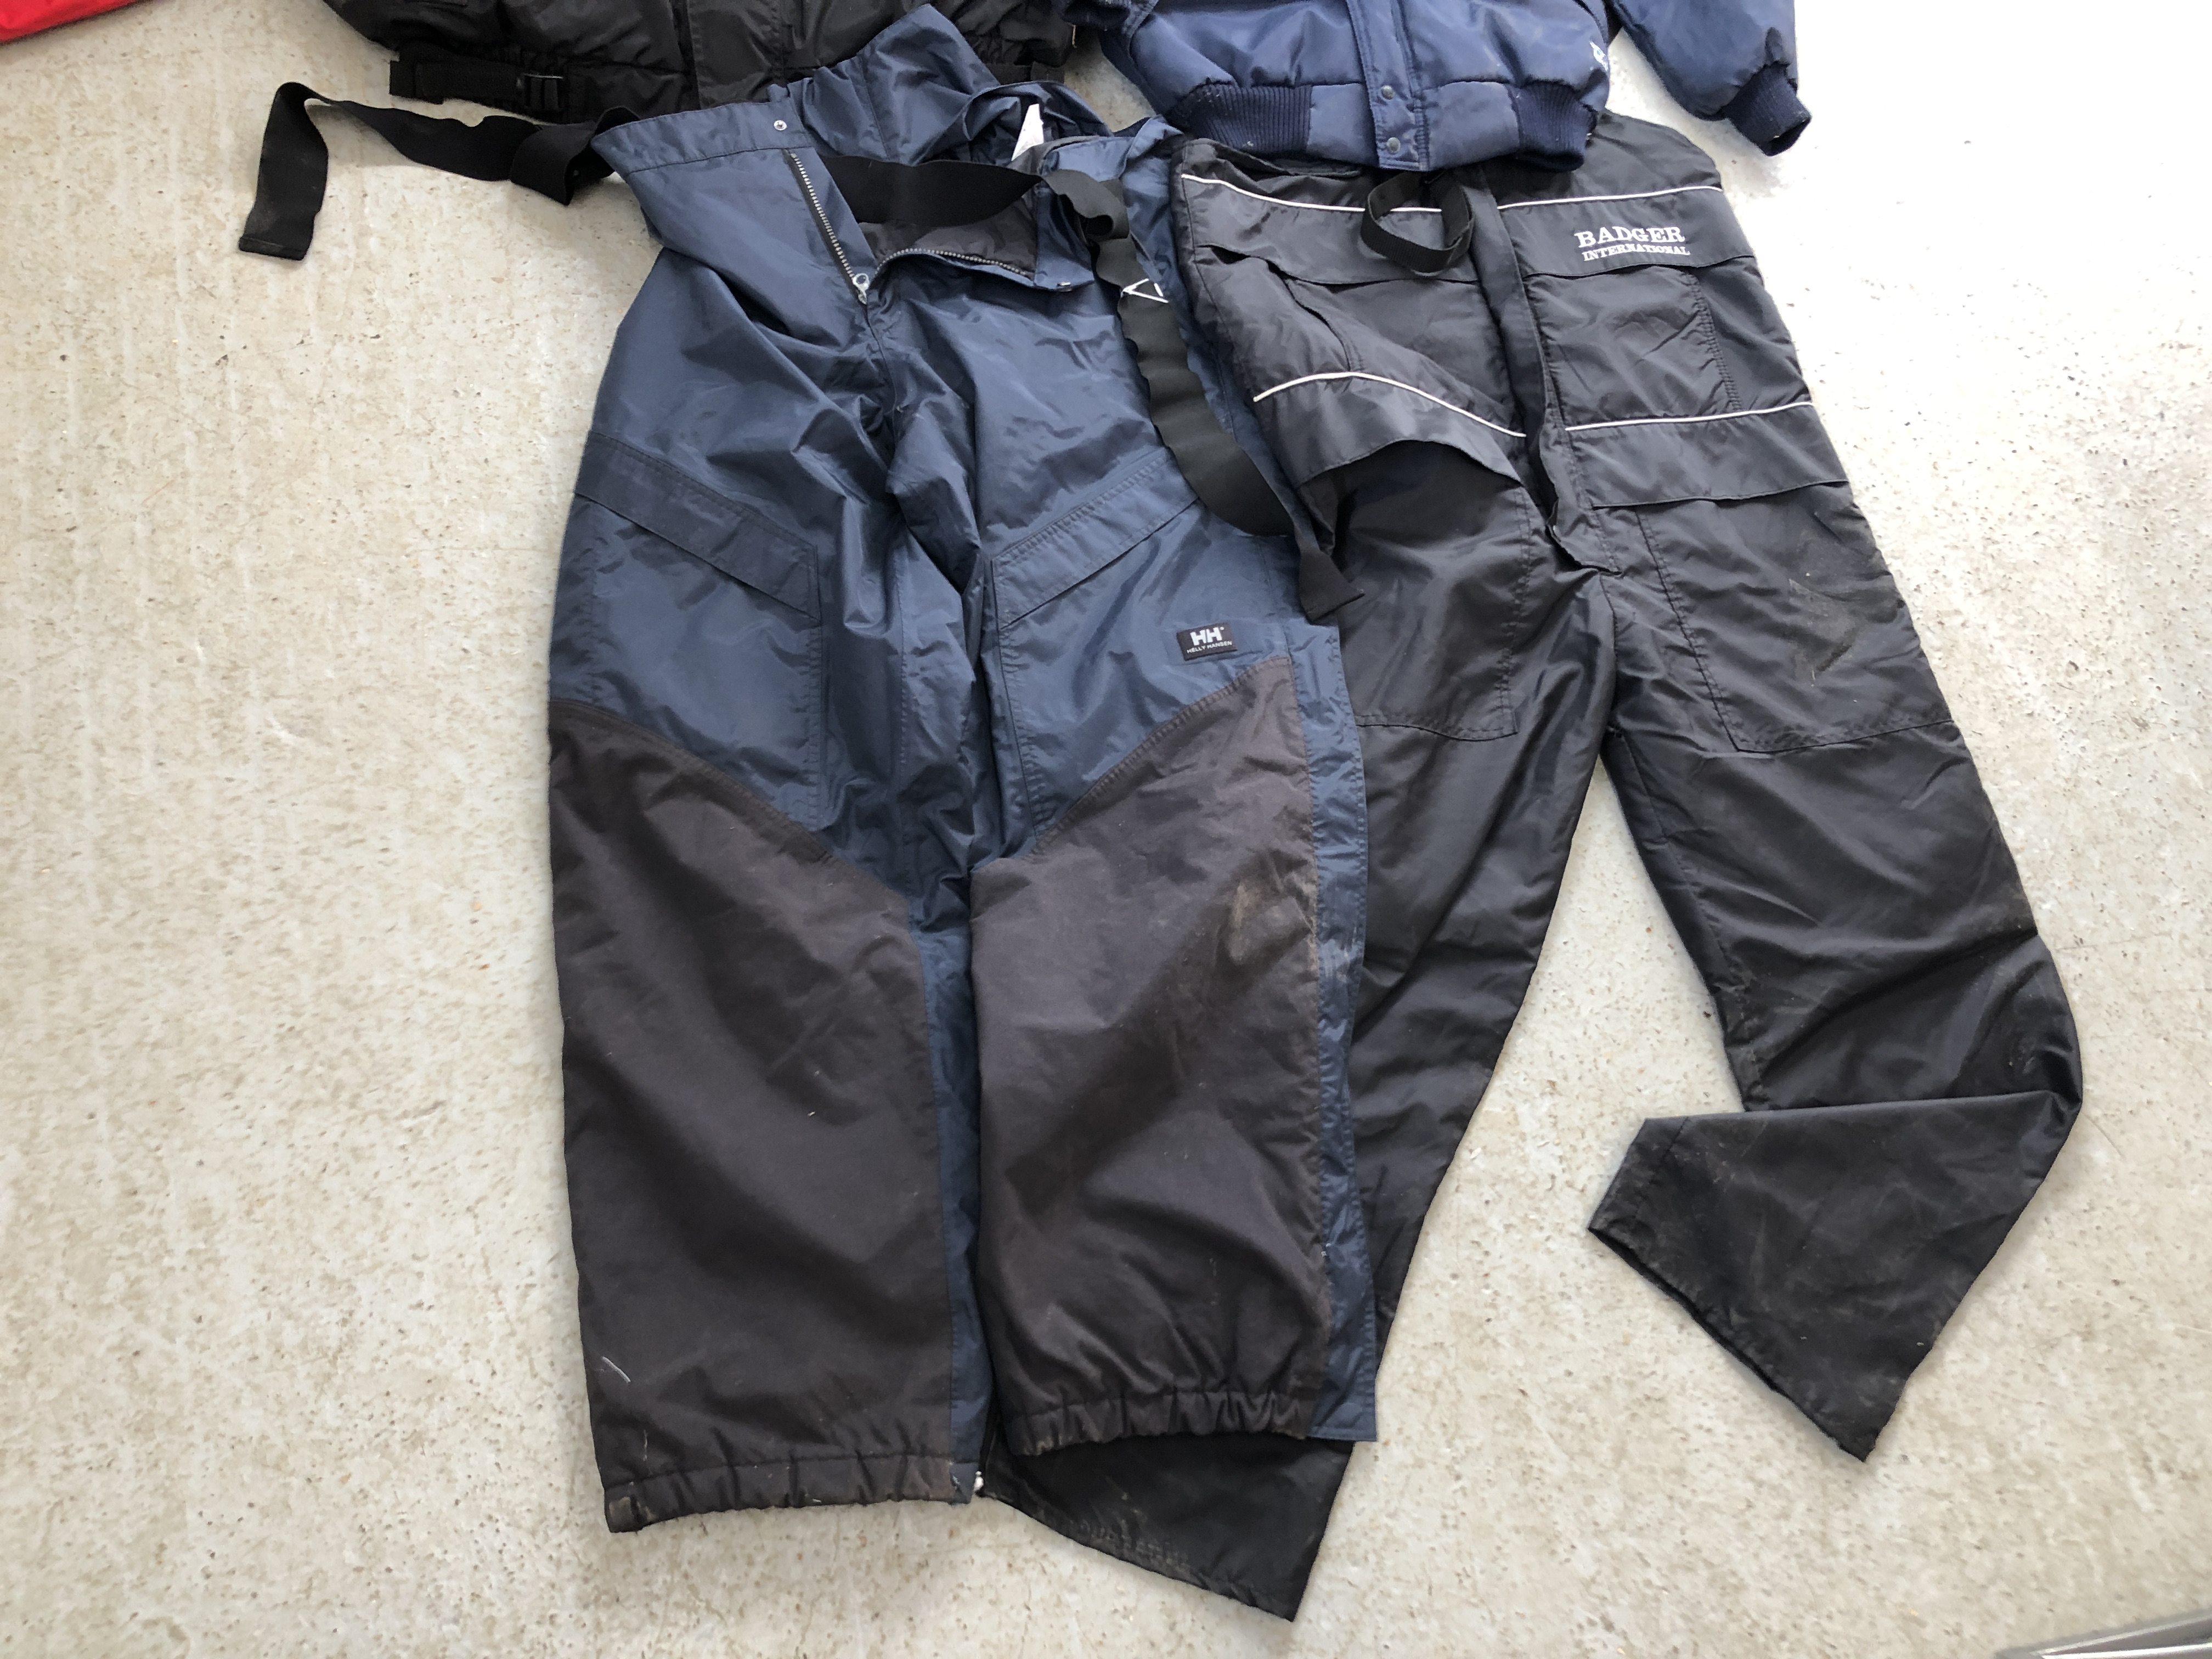 A HELLY HANSEN JACKET AND TROUSERS, JACKET SIZE SMALL, - Image 3 of 4